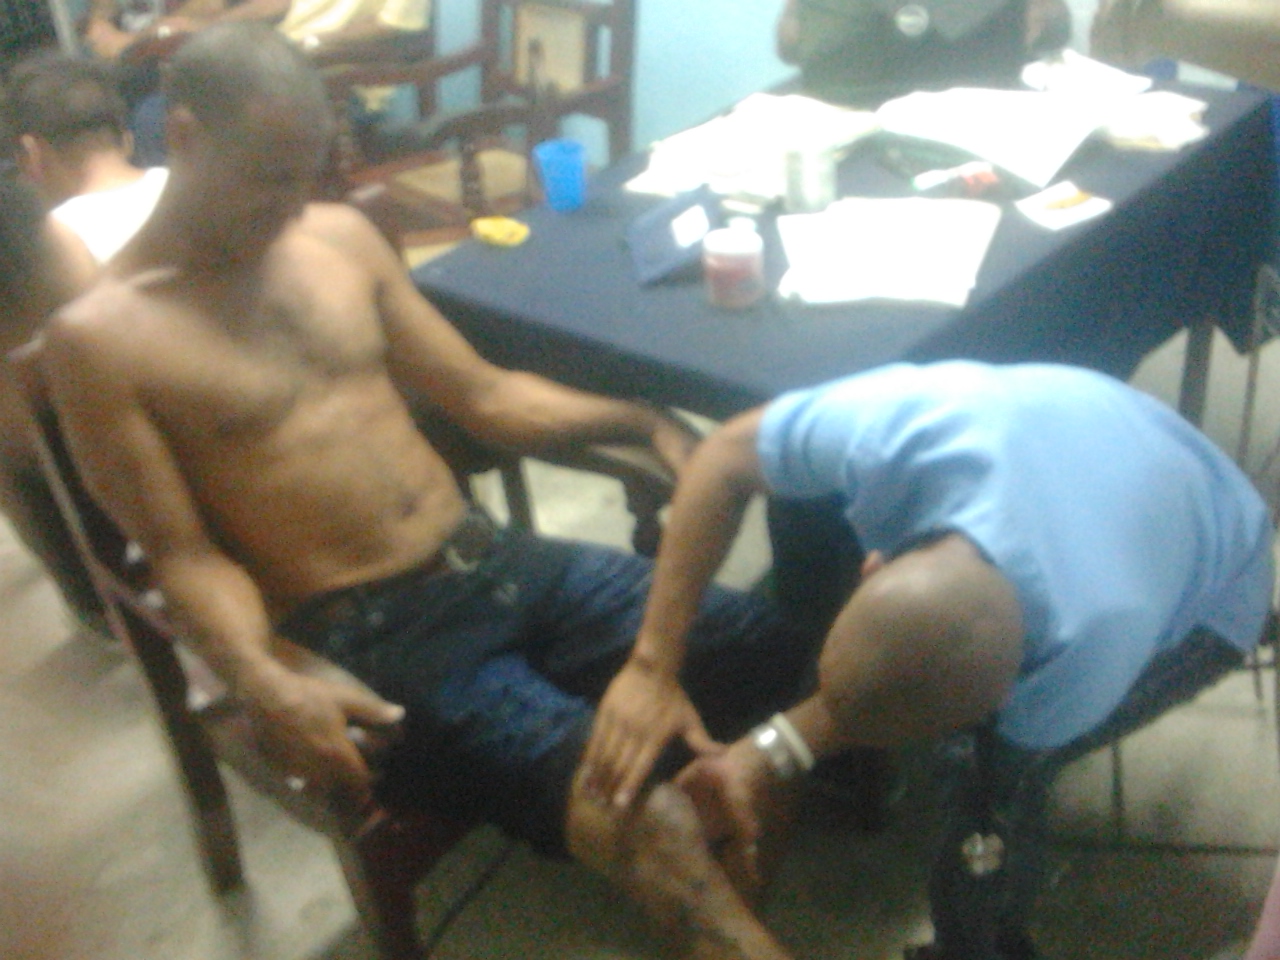 A doctor attends to Roberto Formigo, a UNPACU activist, after being assaulted by police.